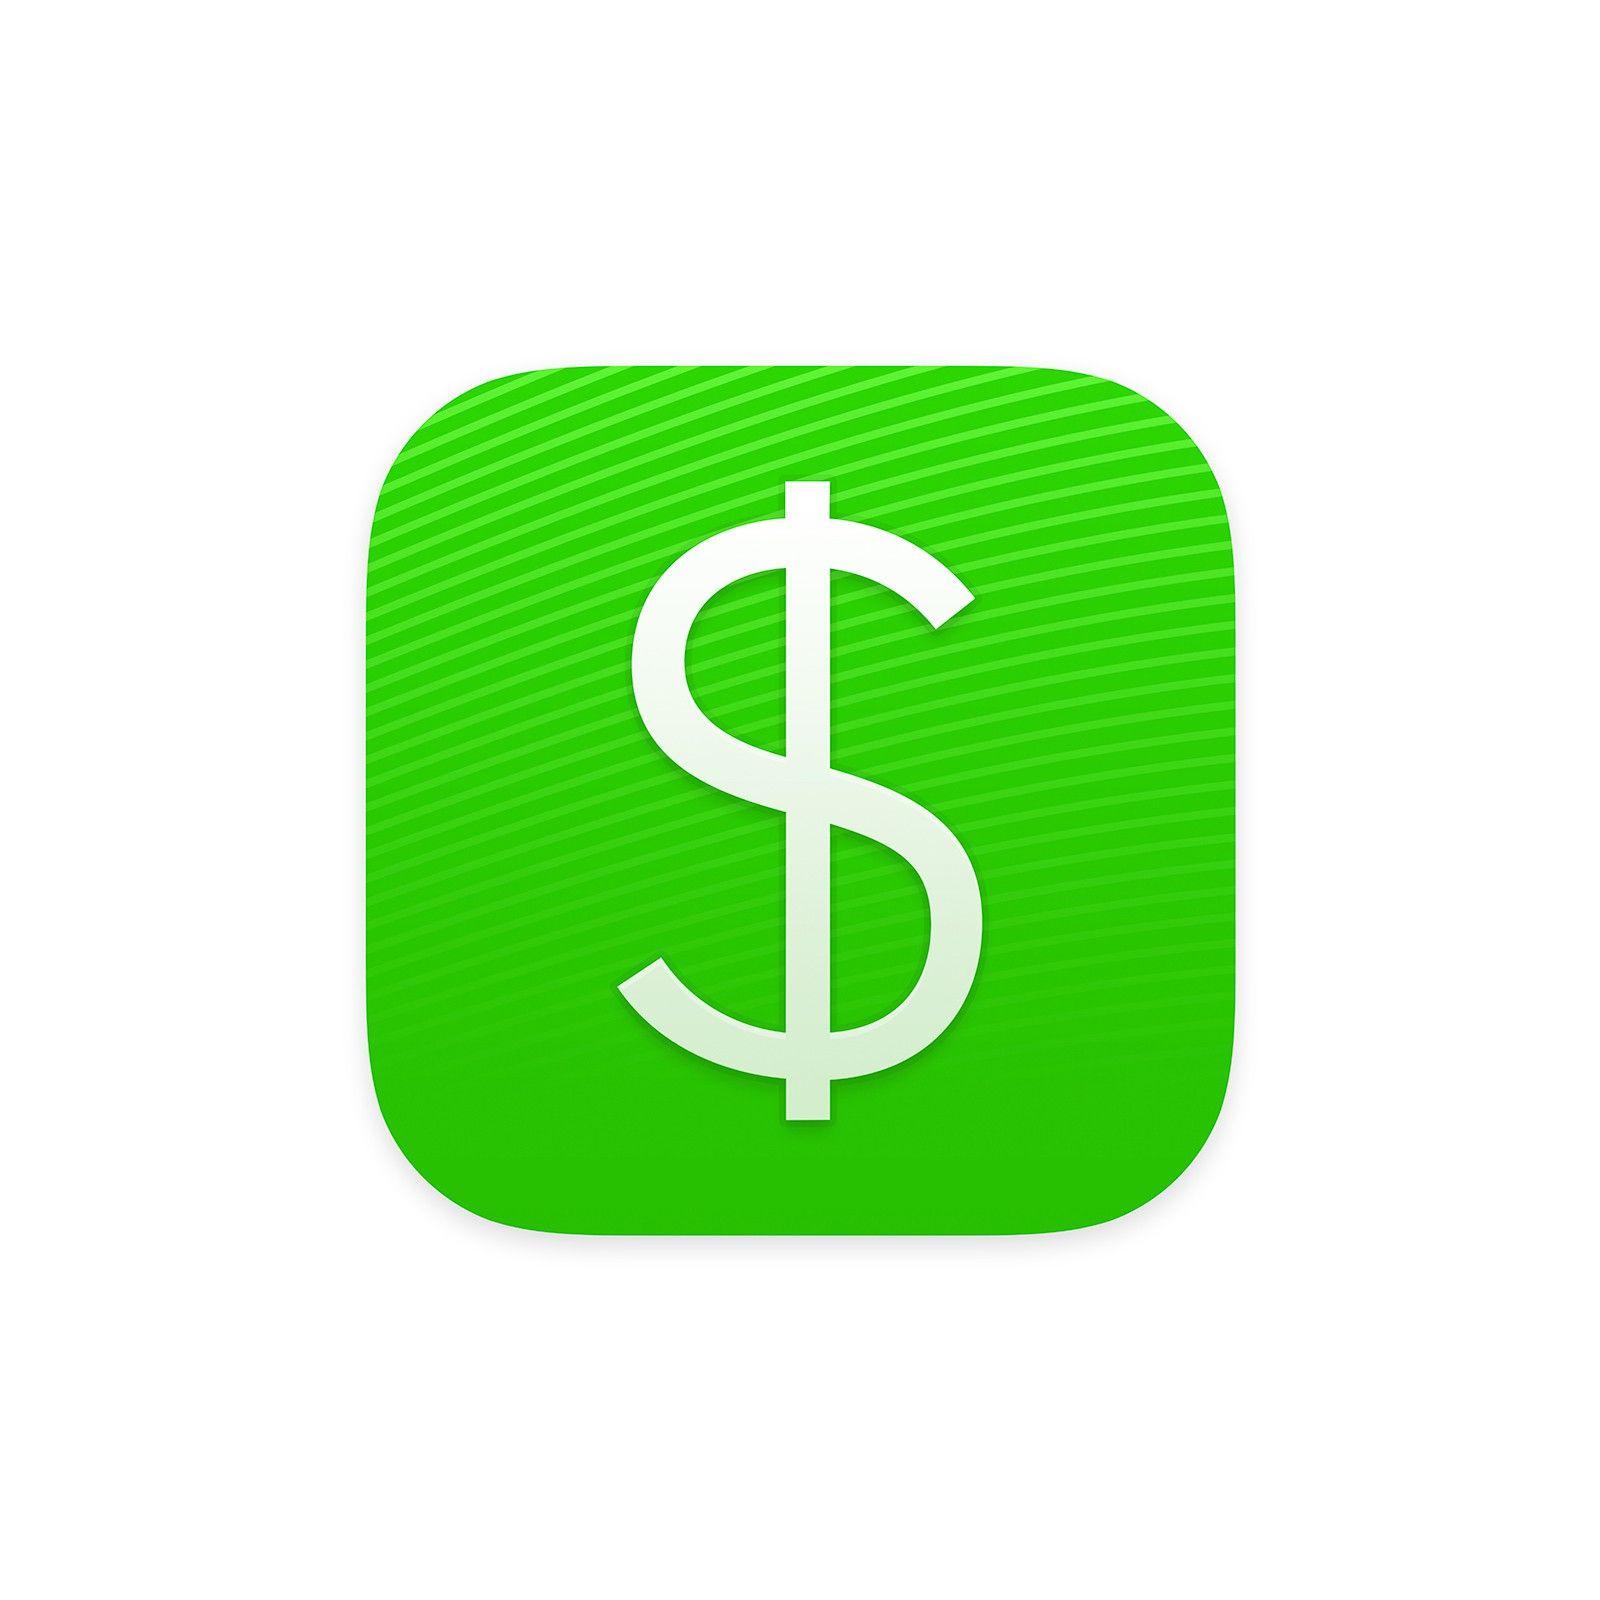 Cash Accepted Logo - Square Cash Payment Processing Industry Insight